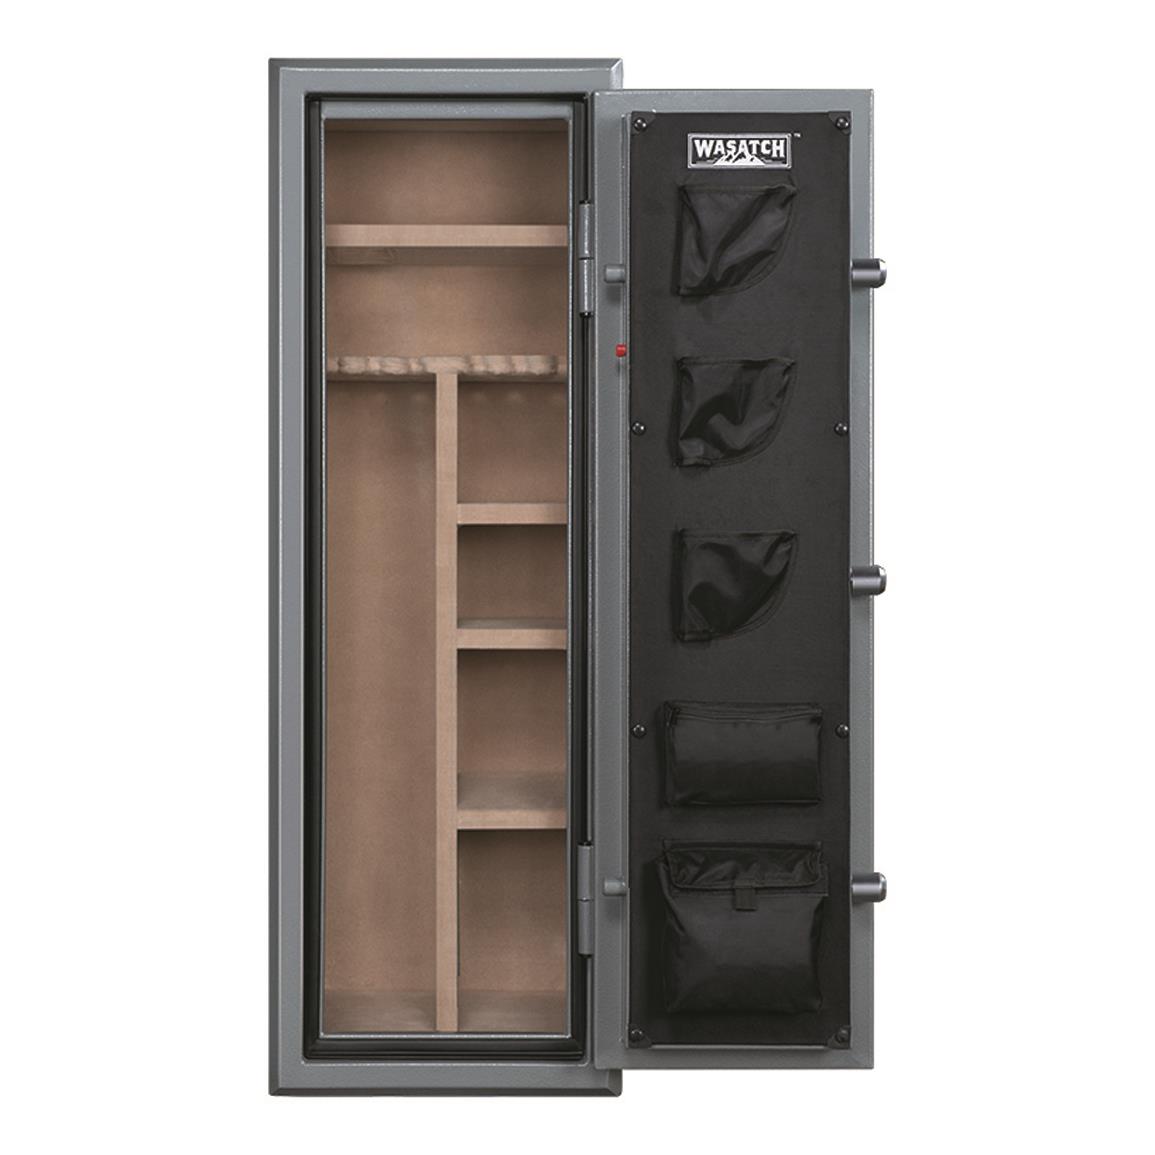 wasatch 18 gun fire and waterproof safe with electronic lock